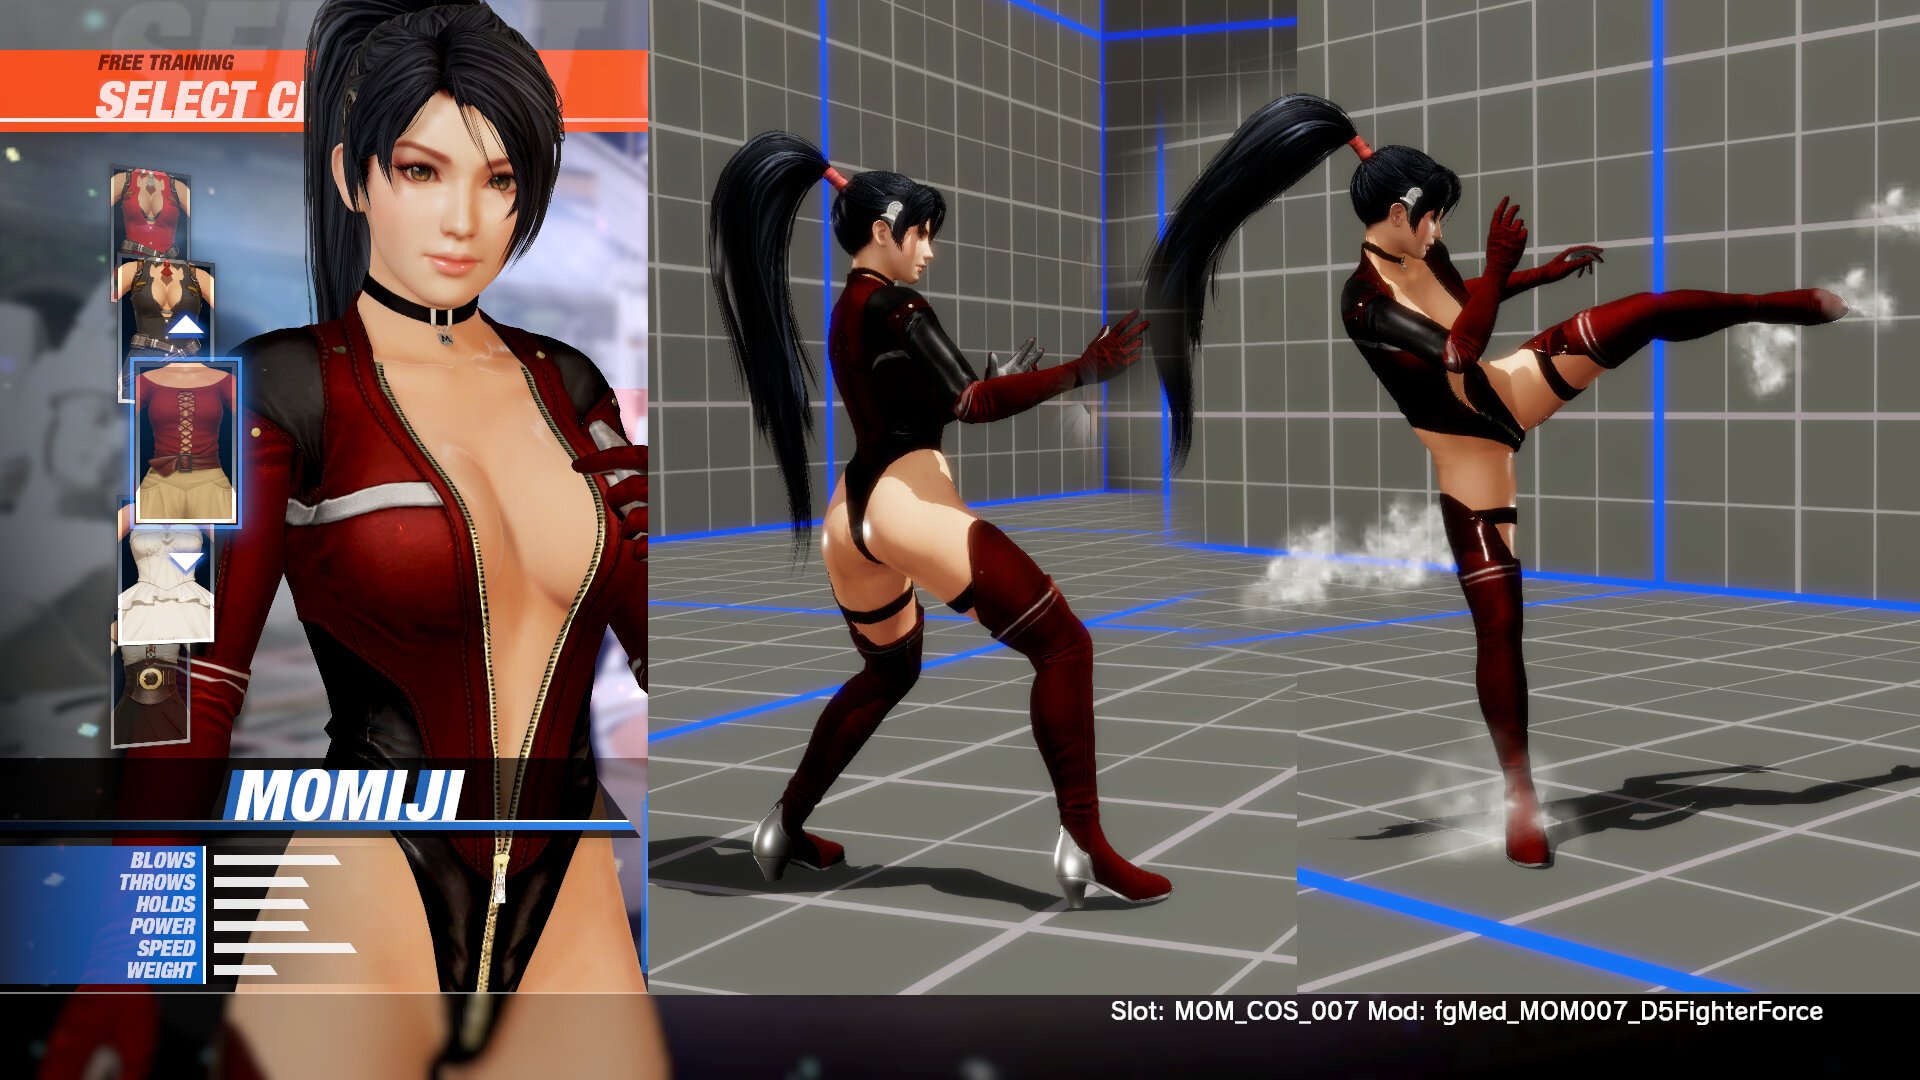 Momiji simplified Fighter Force Suit from DOA5